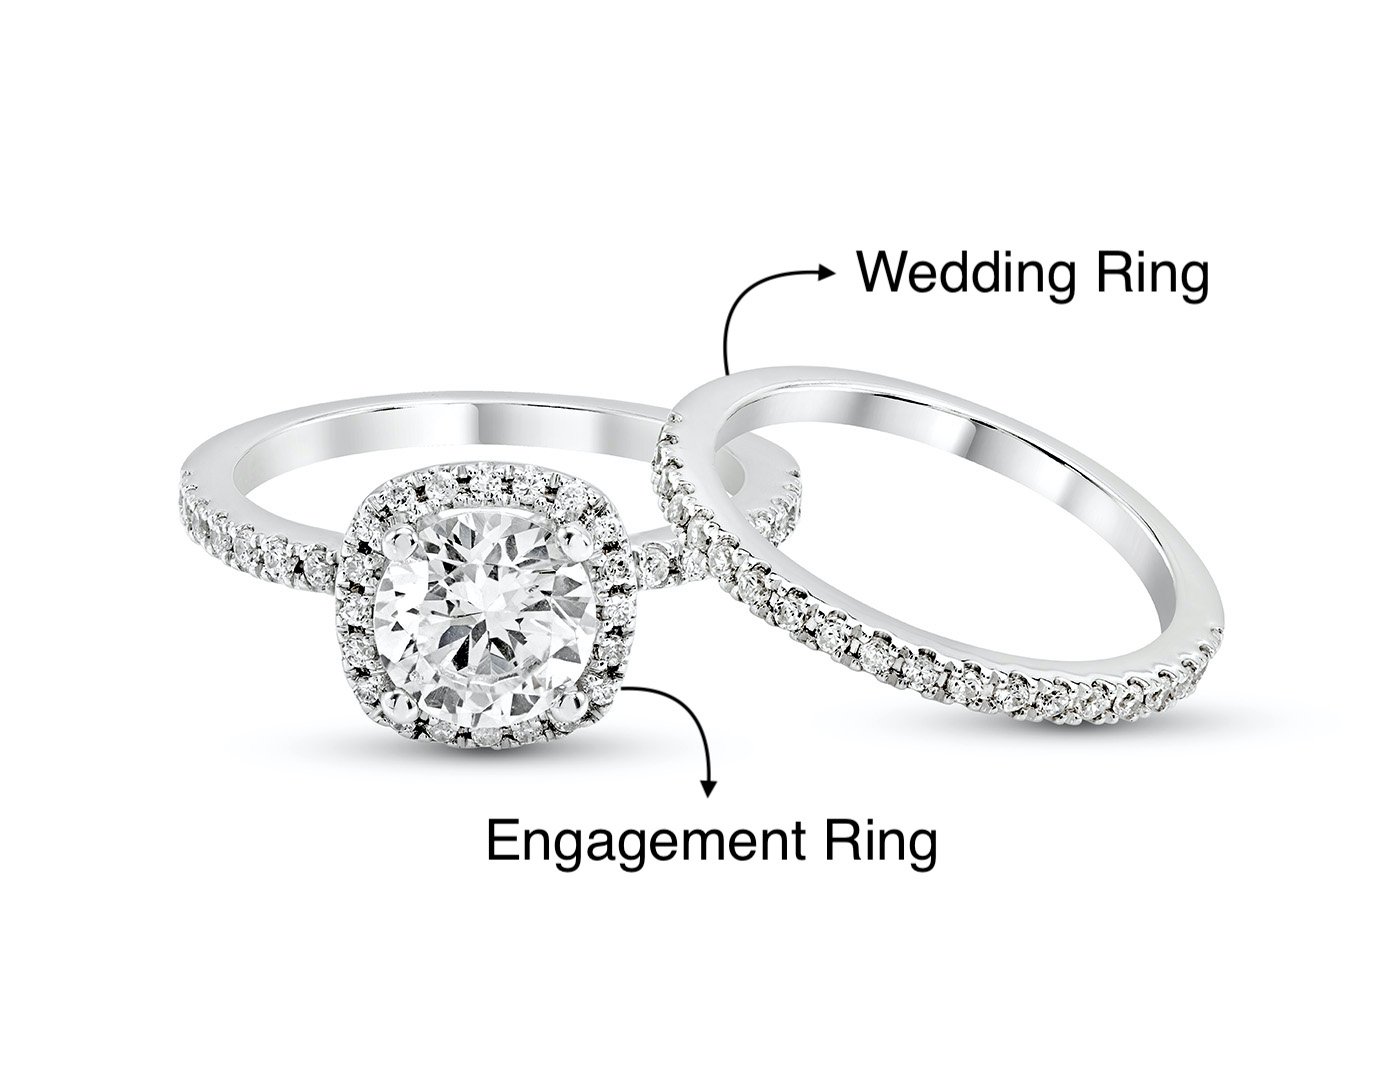 Engagement Rings vs. Wedding Rings: The Difference